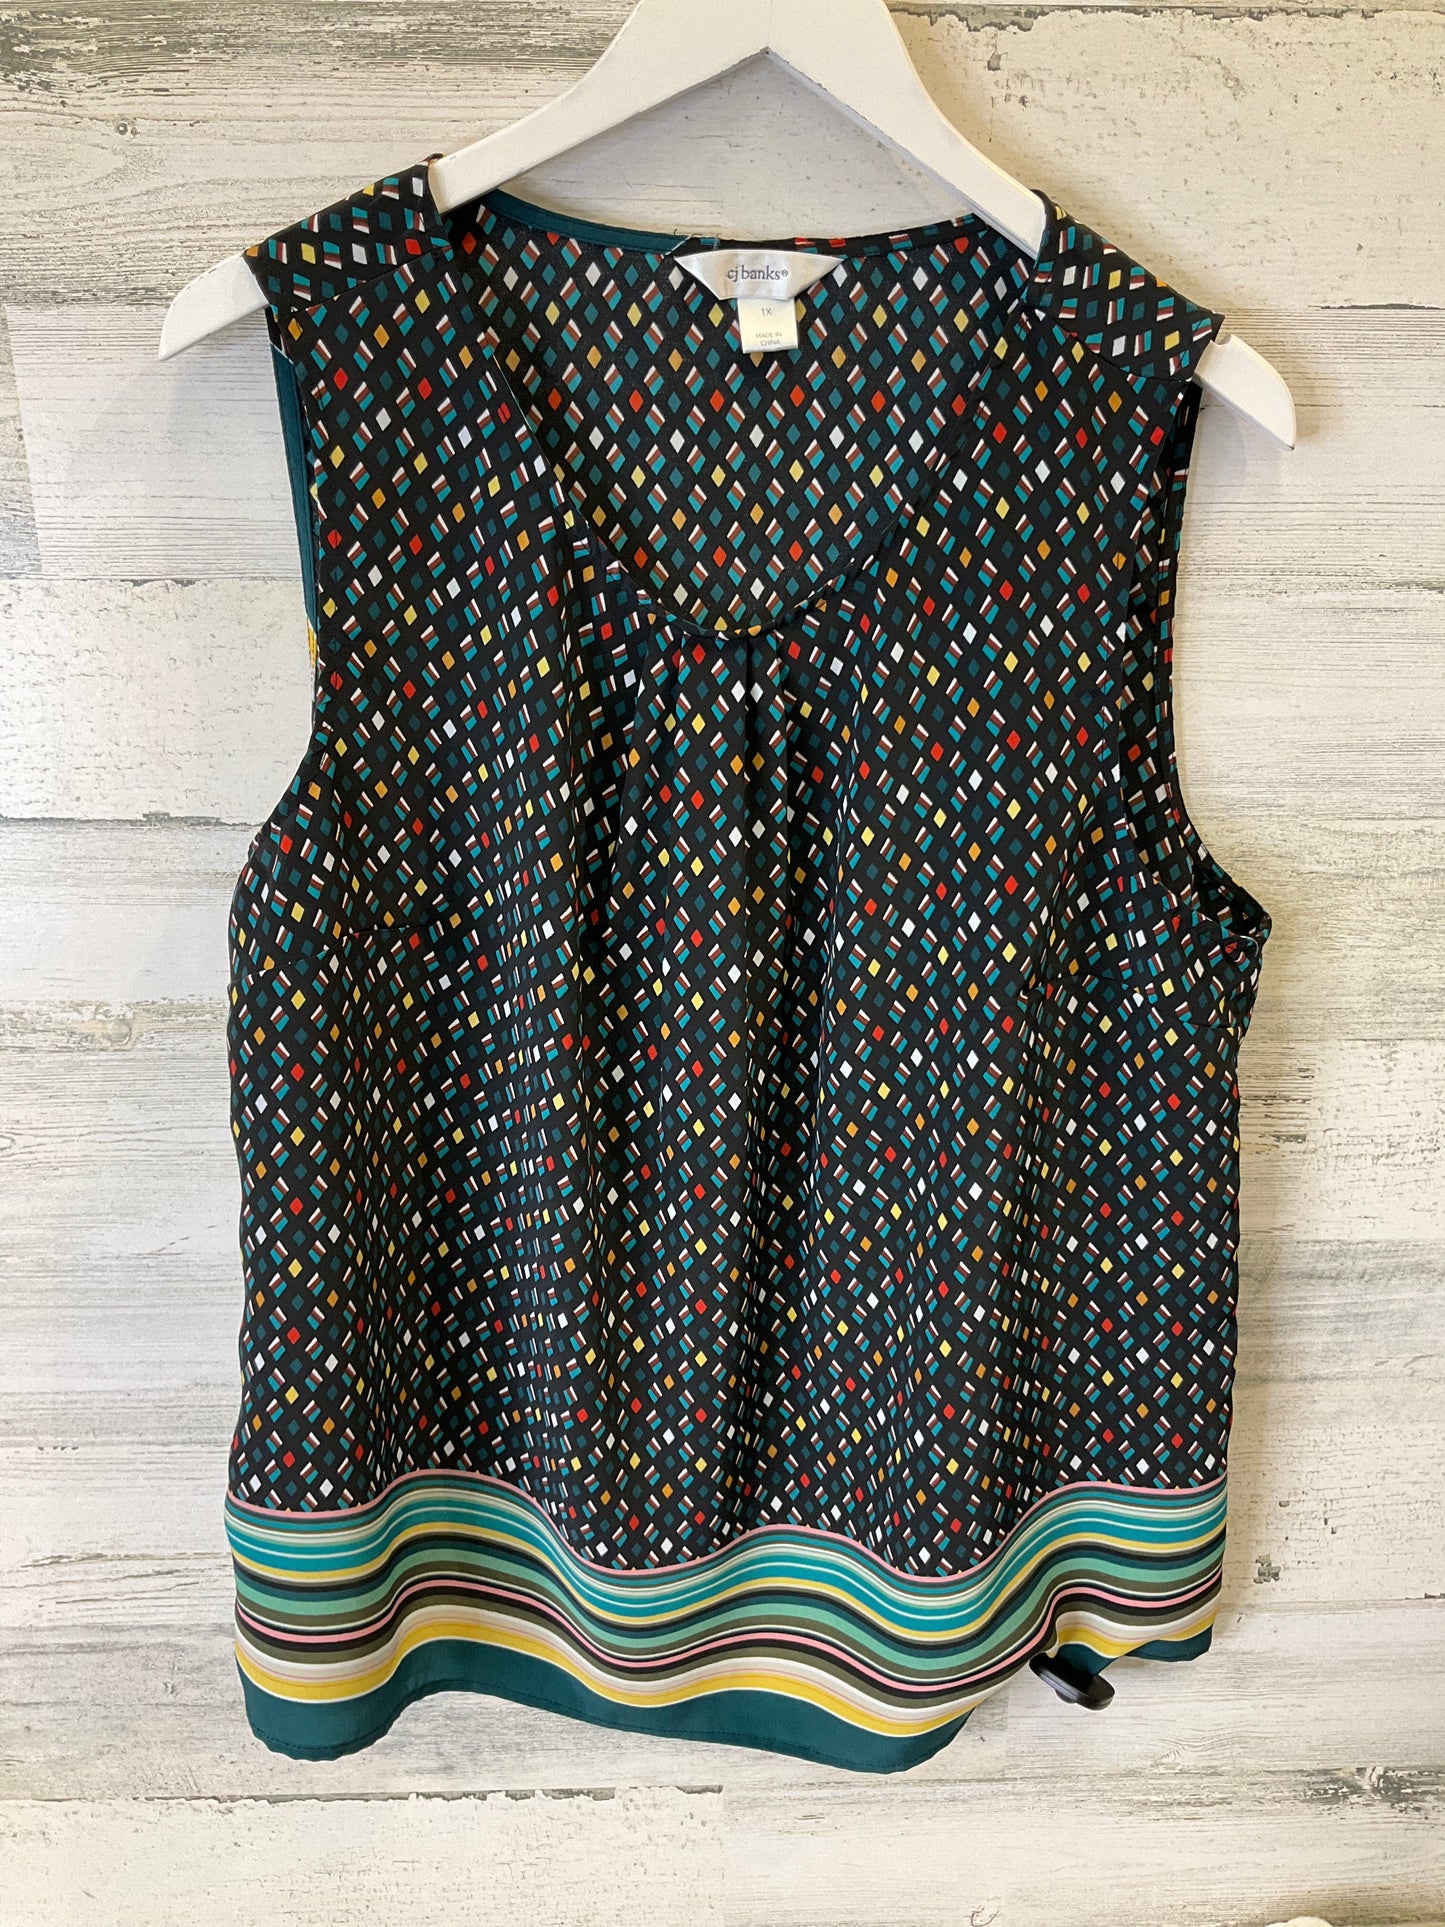 Multi-colored Top Sleeveless Clothes Mentor, Size 1x